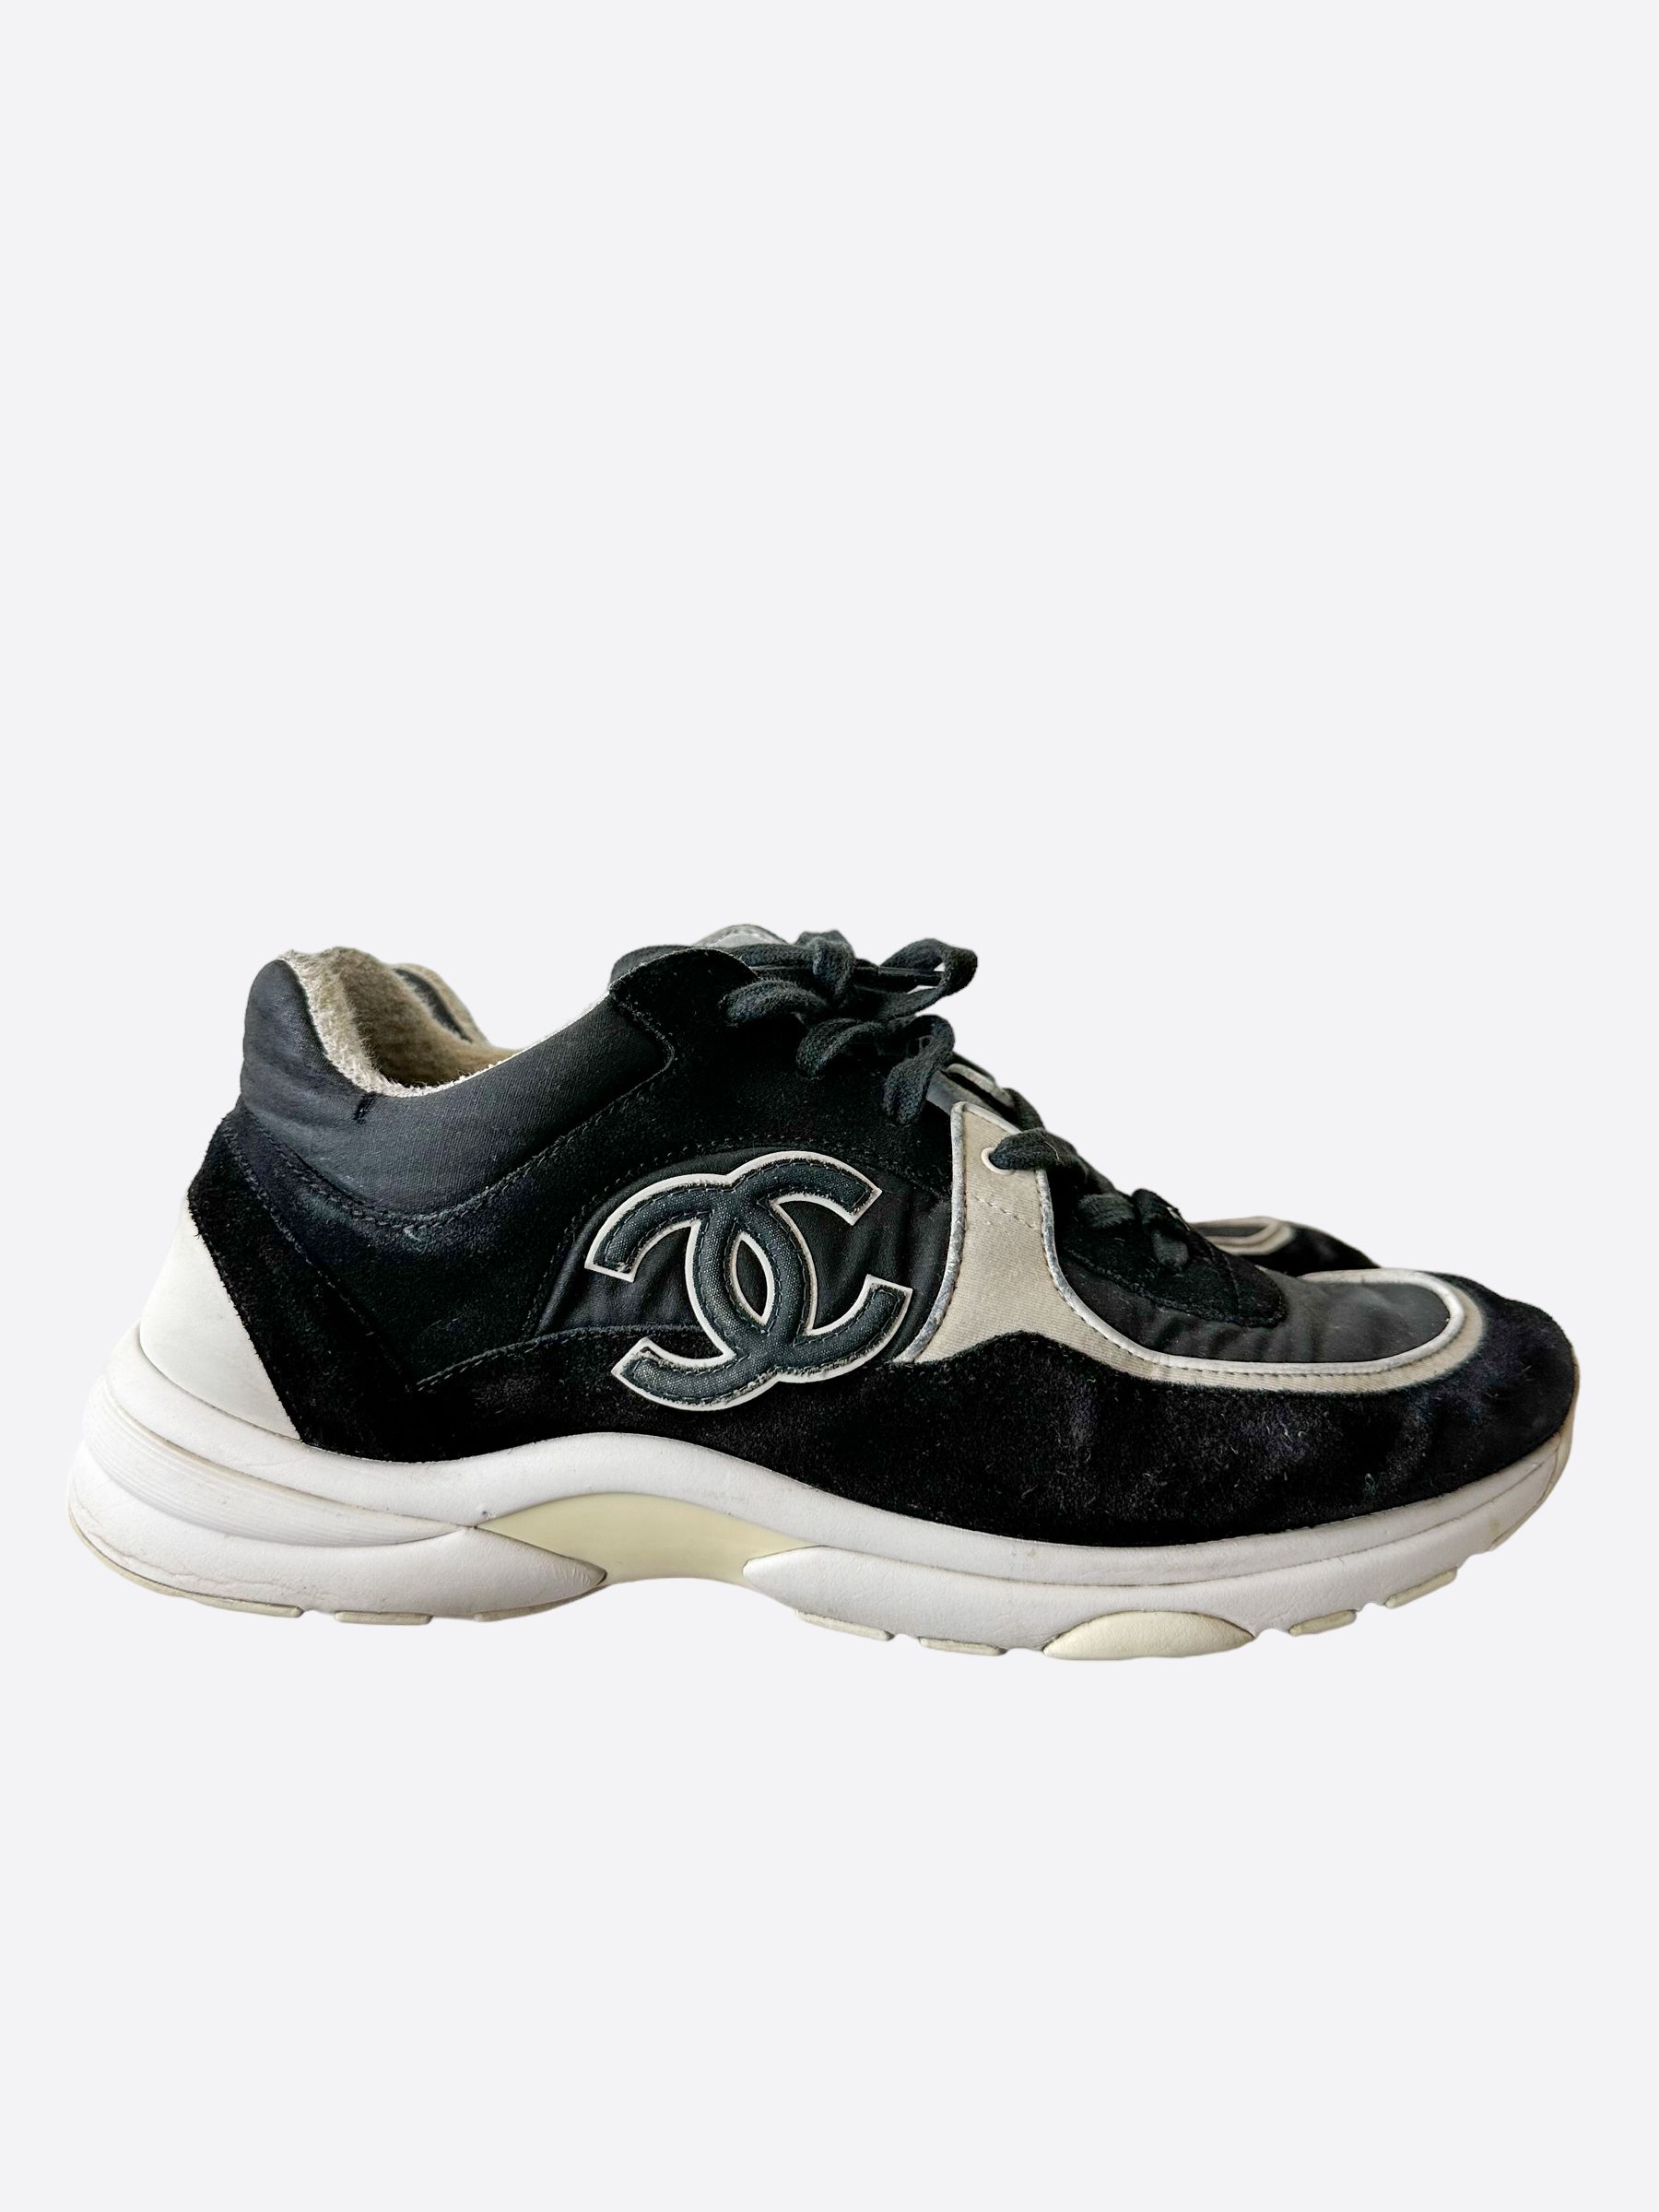 CHANEL Shoes for Men